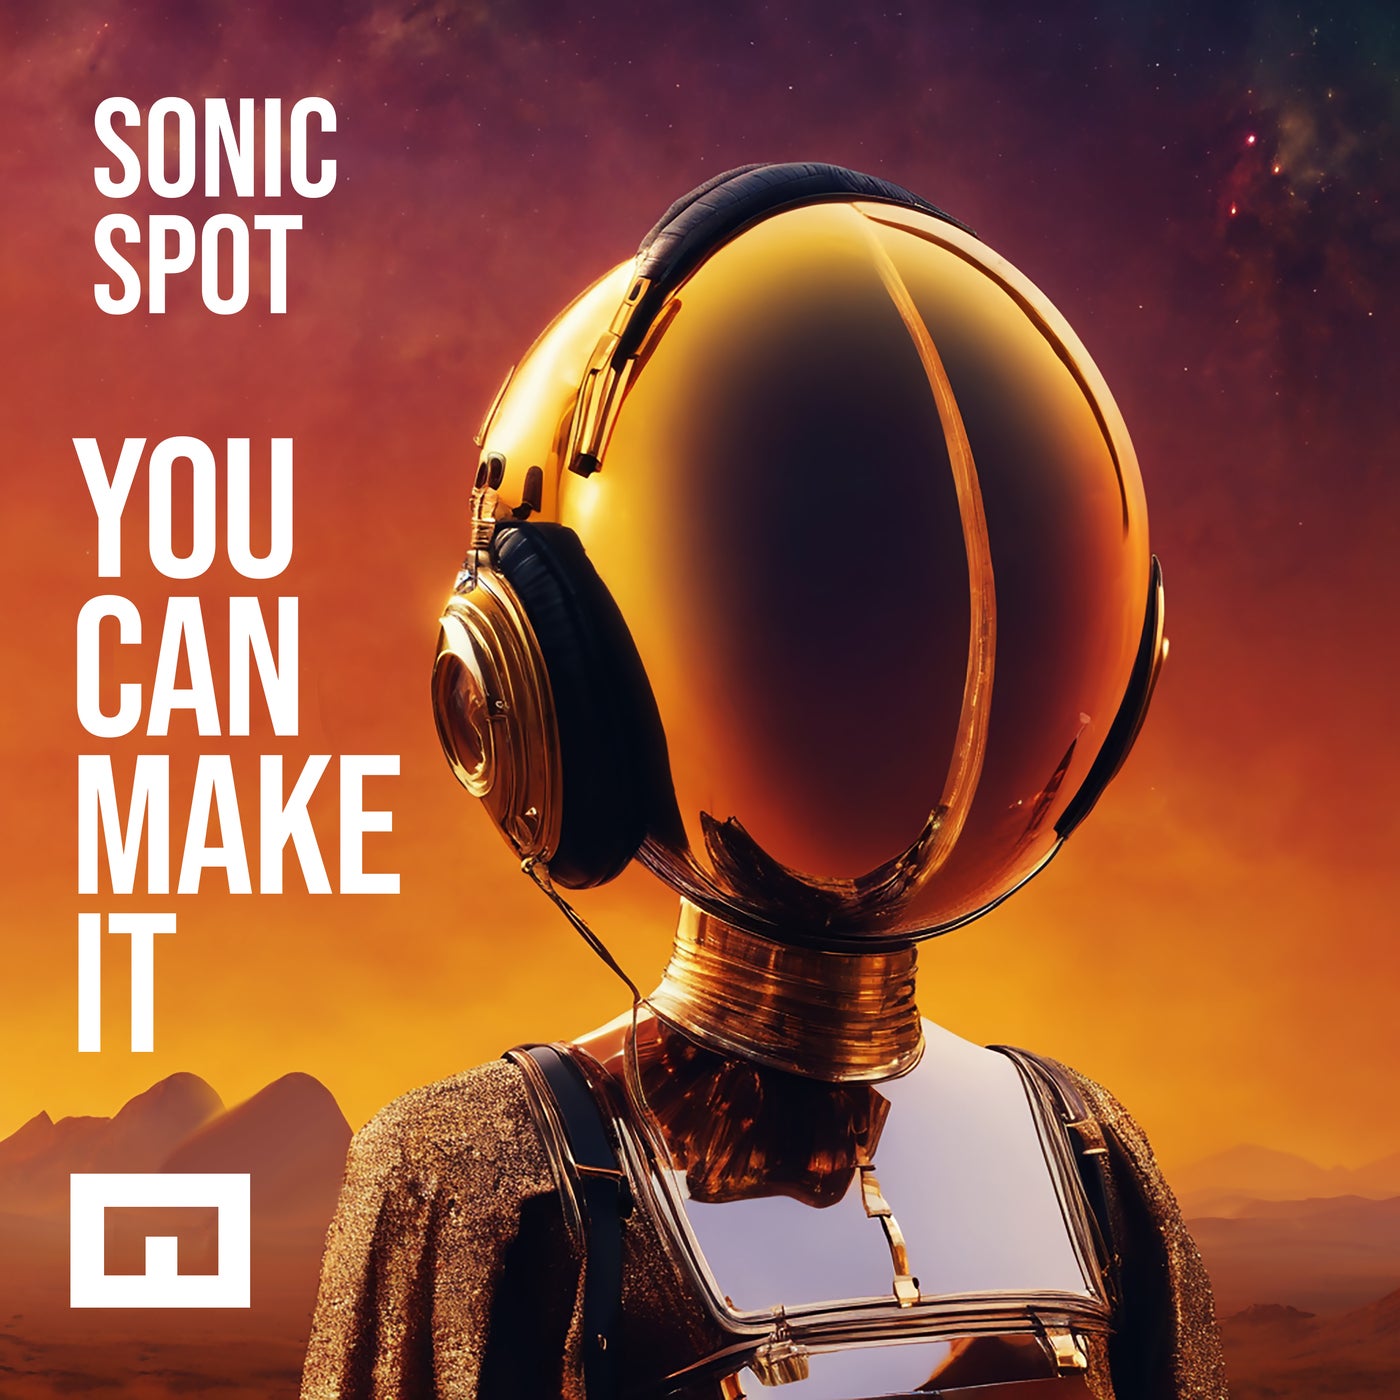 You Can Make It - Remix for SonicSpot